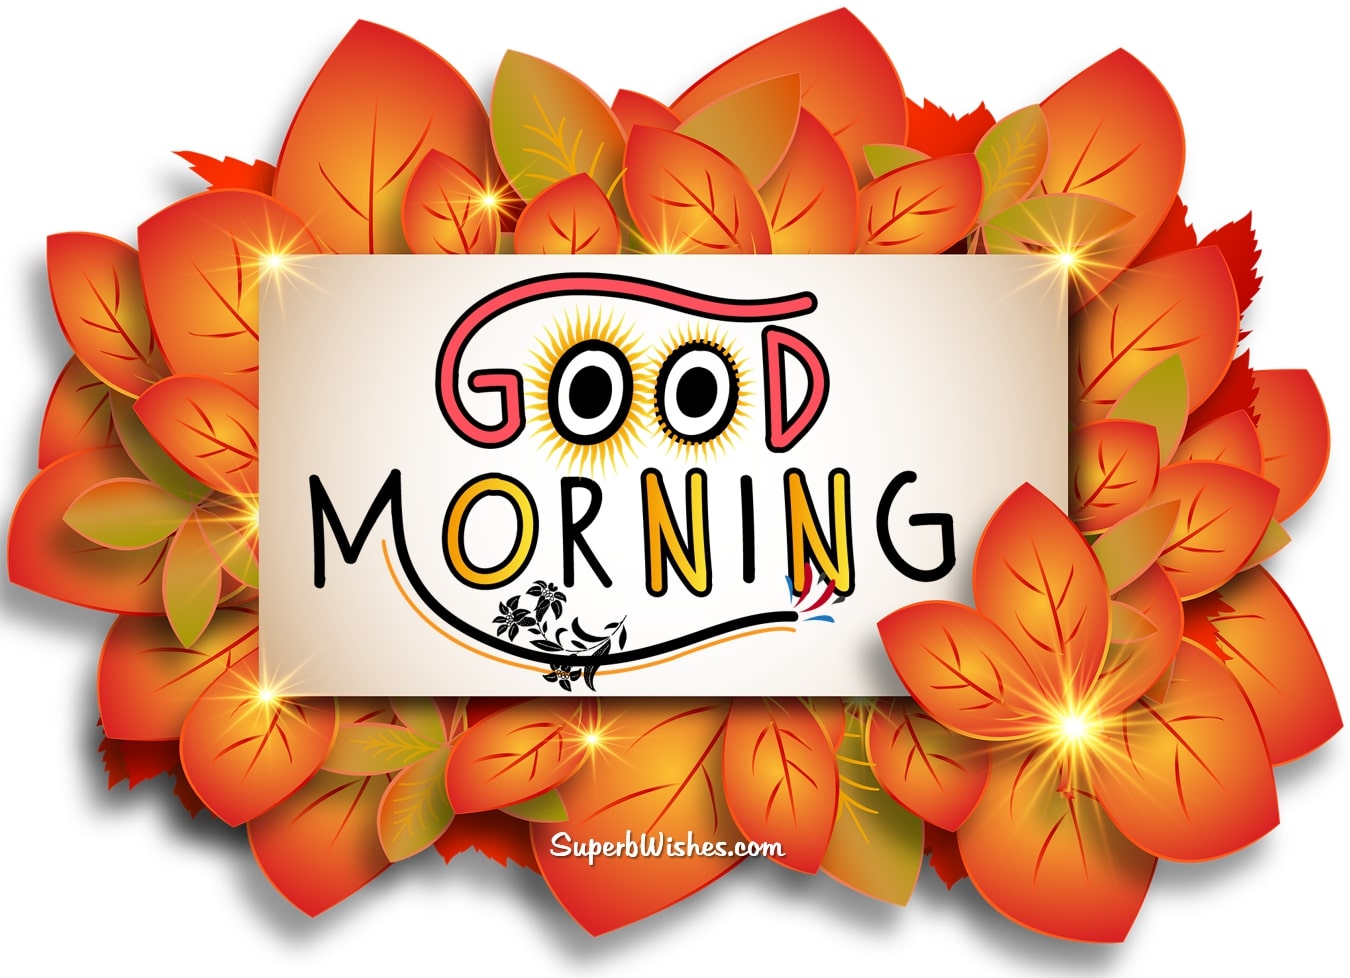 Beautiful good morning pictures. Superbwishes.com